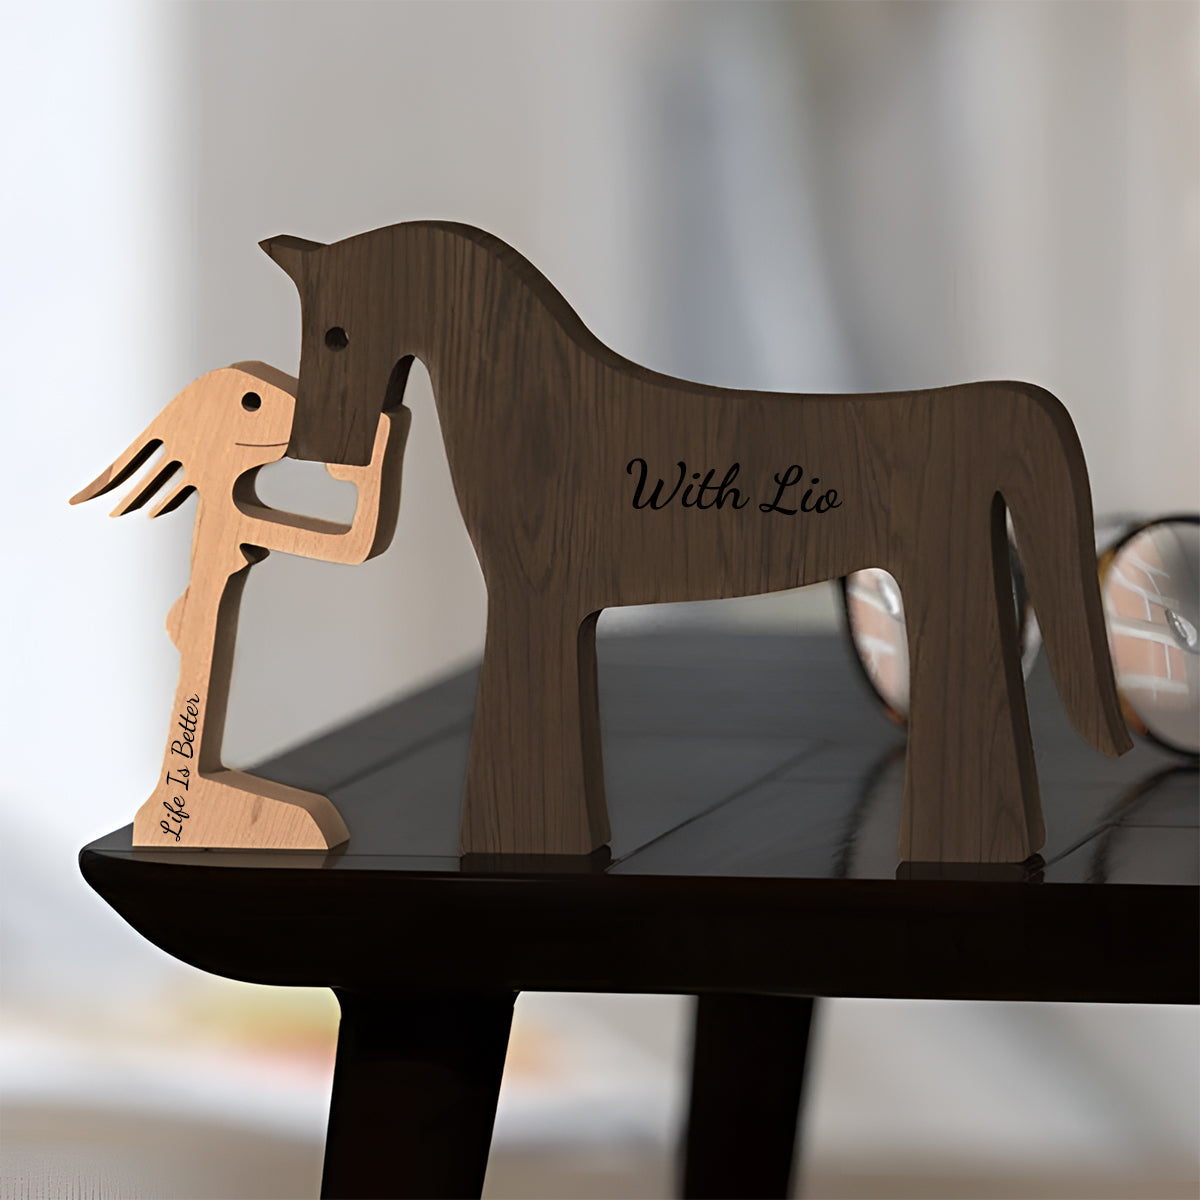 I Still Miss You - Personalized Dog Decorative Figures